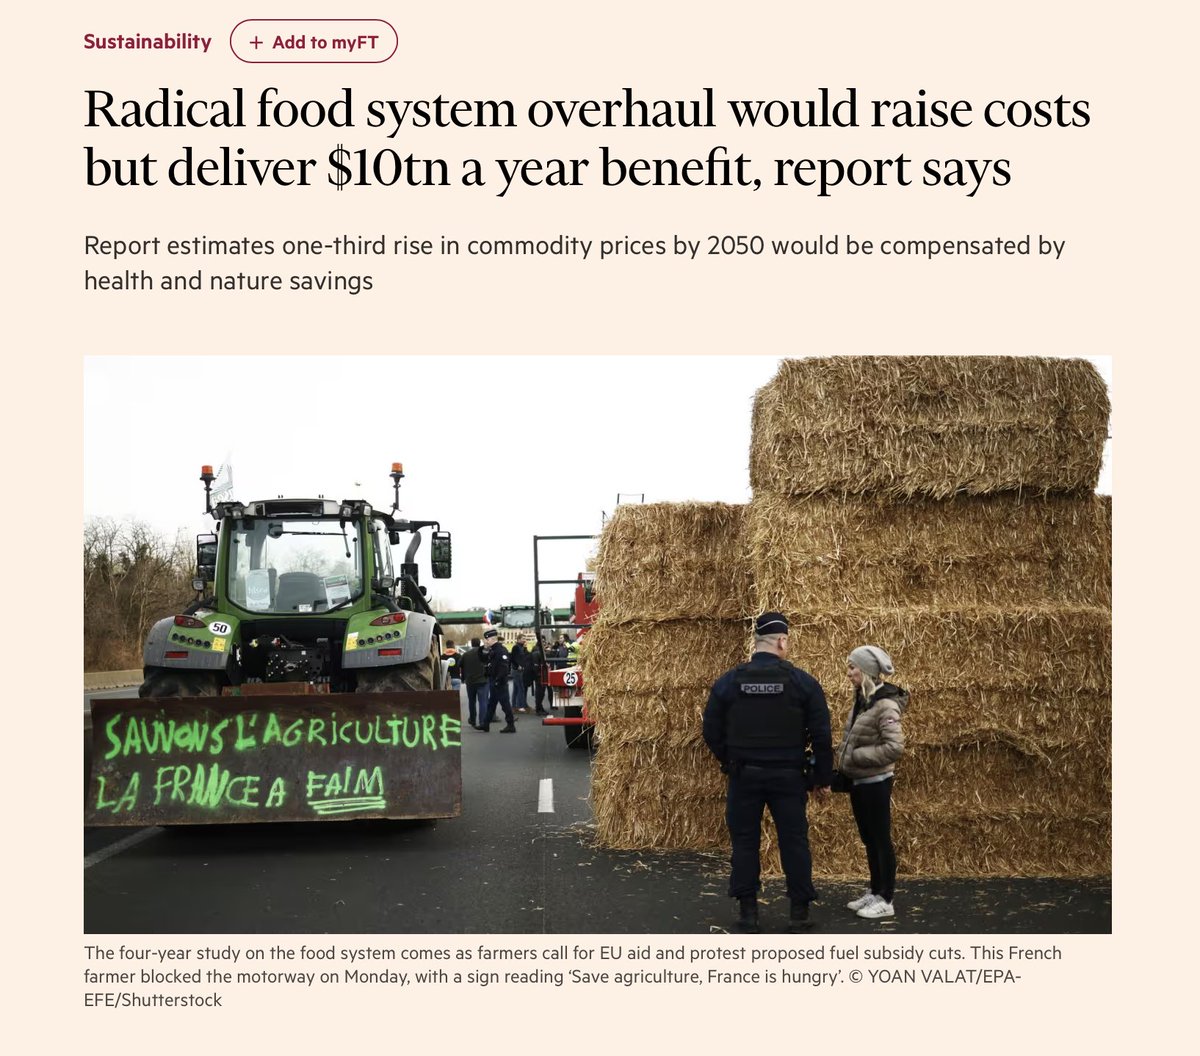 Radical food system overhaul would raise costs but deliver $10tn a year benefit, report says via @FT on.ft.com/3um32ae @FOLUCoalition @PIK_Climate @EATforum @IKEAFoundation @RockefellerFdn @wellcometrust @Climateforest